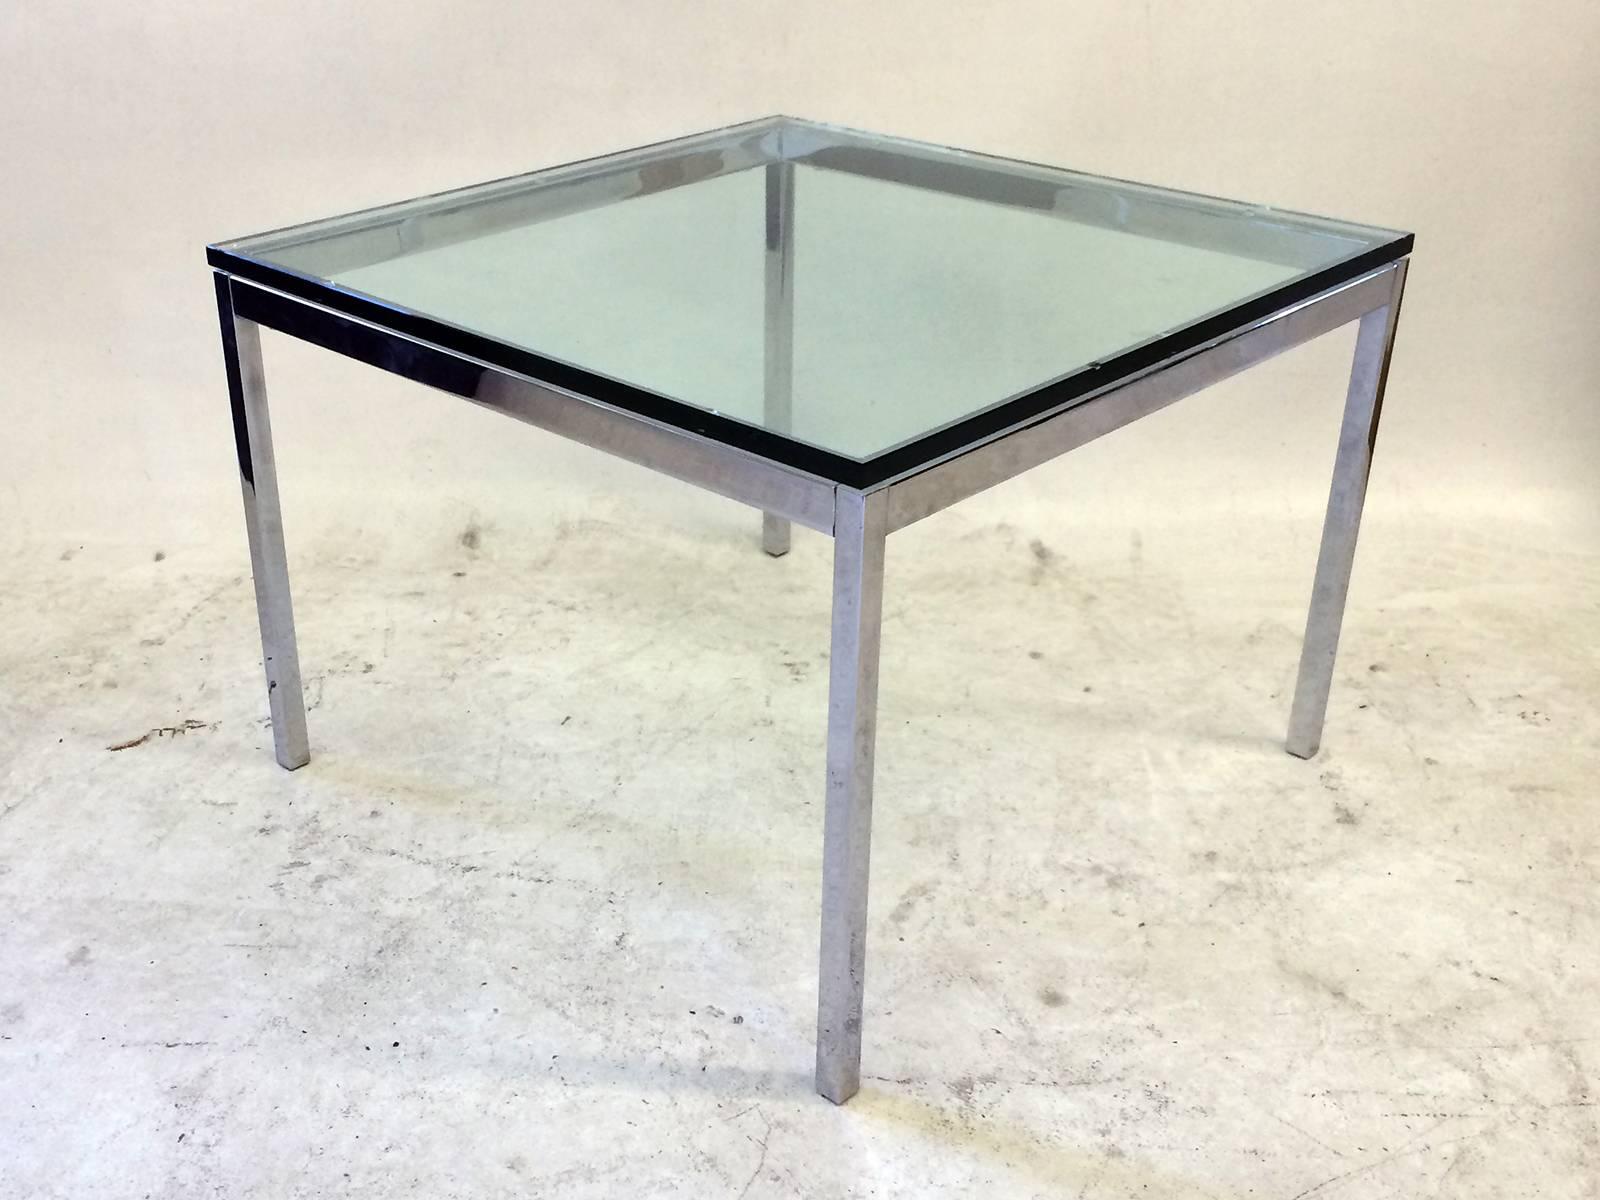 This glass top side table in chromed steel by Florence Knoll for Knoll retains its label Knoll.